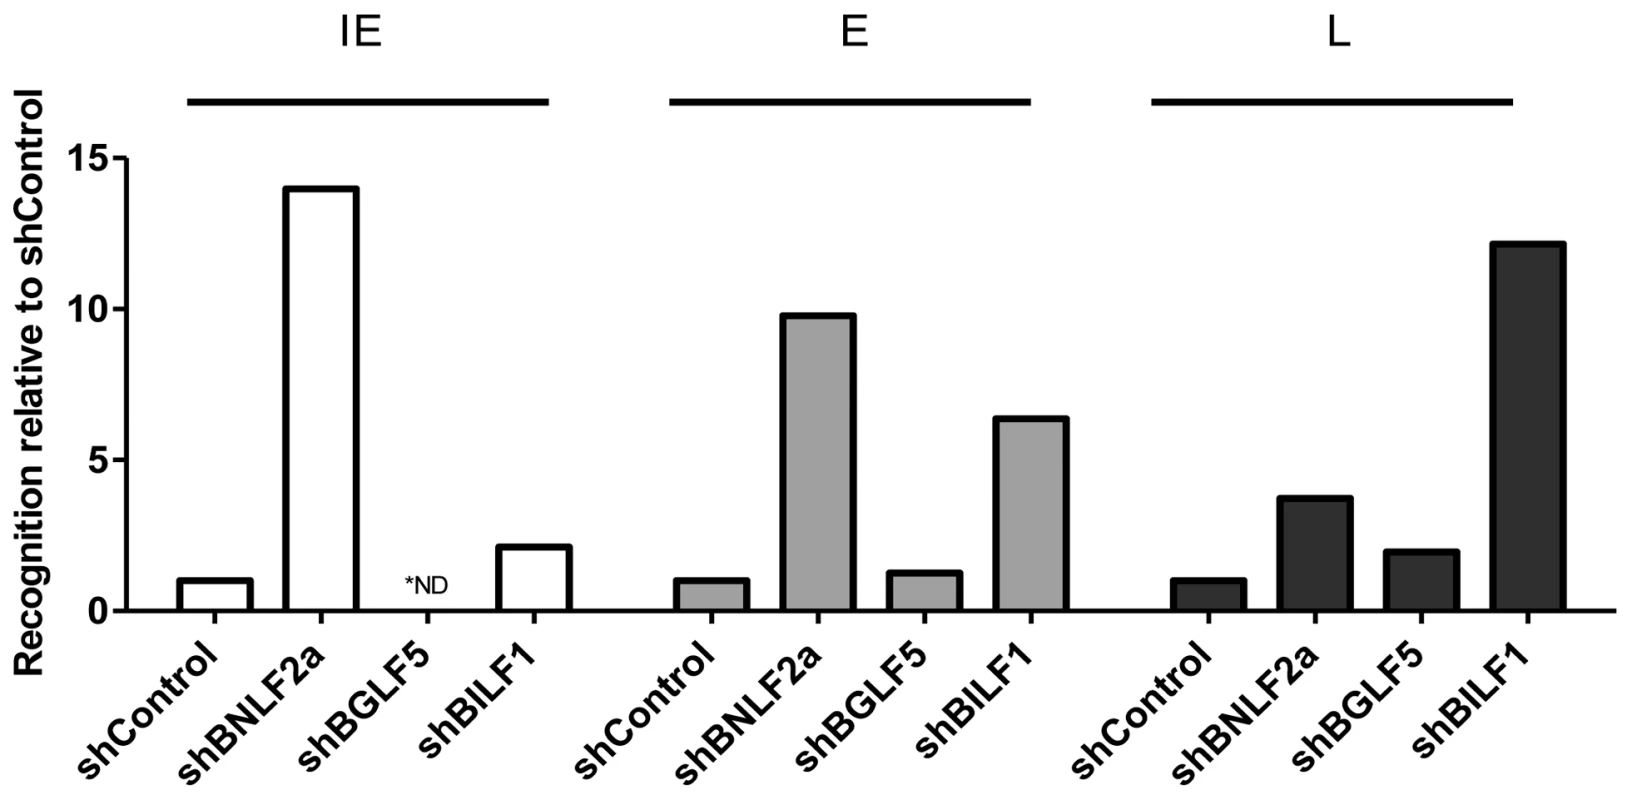 Direct comparison of the relative effects of BNLF2a, BGLF5 and BILF1 on T cell recognition of IE-YVL (BRLF1), E-GLC (BMLF1) and L-FLD (BALF4) epitopes.